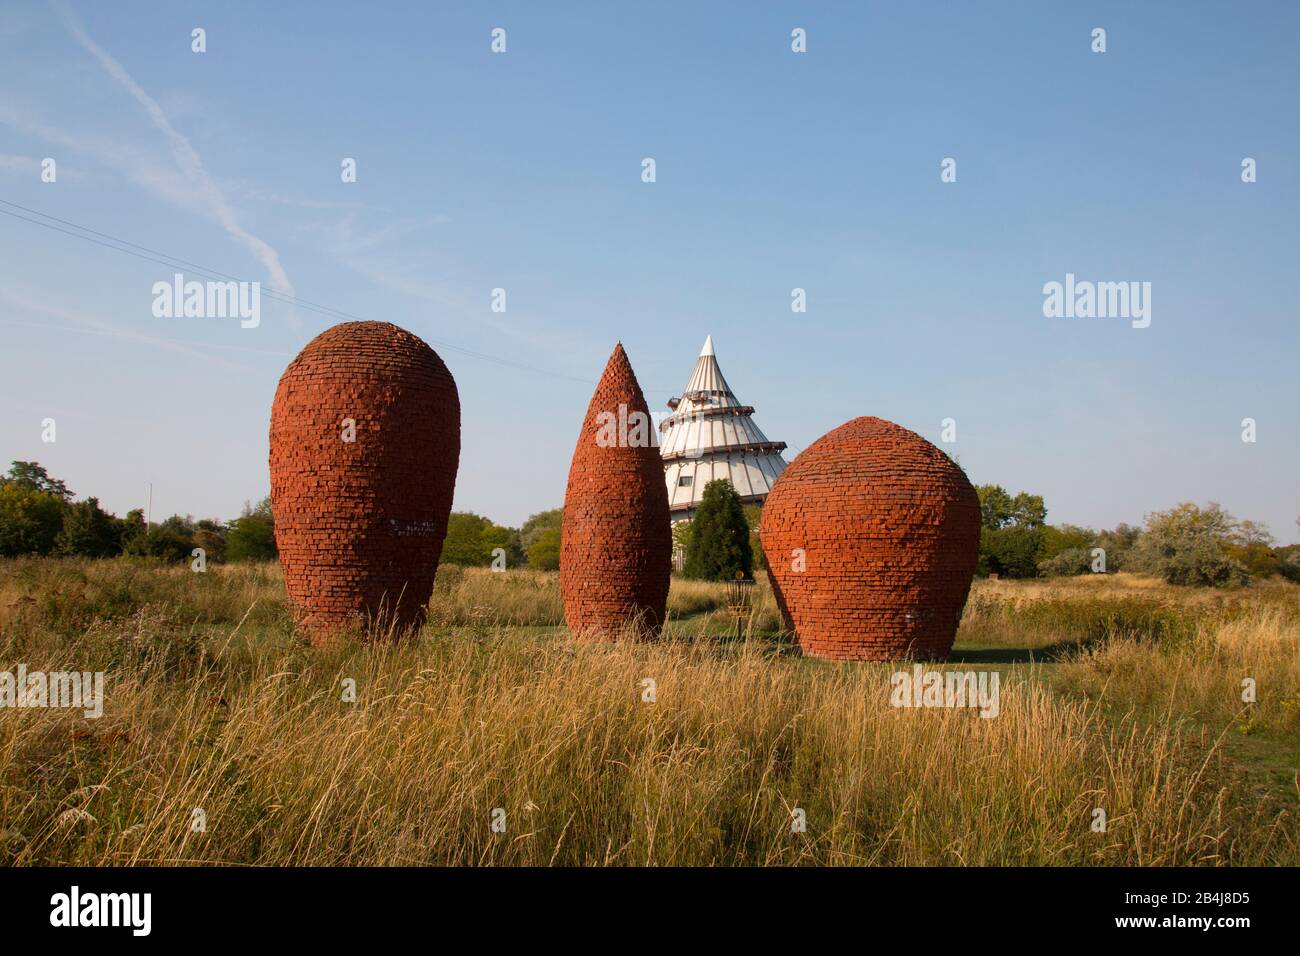 Germany, Saxony-Anhalt, Magdeburg: view of three brick cones and the millennium tower in Elbauenpark Magdeburg, Germany. Stock Photo